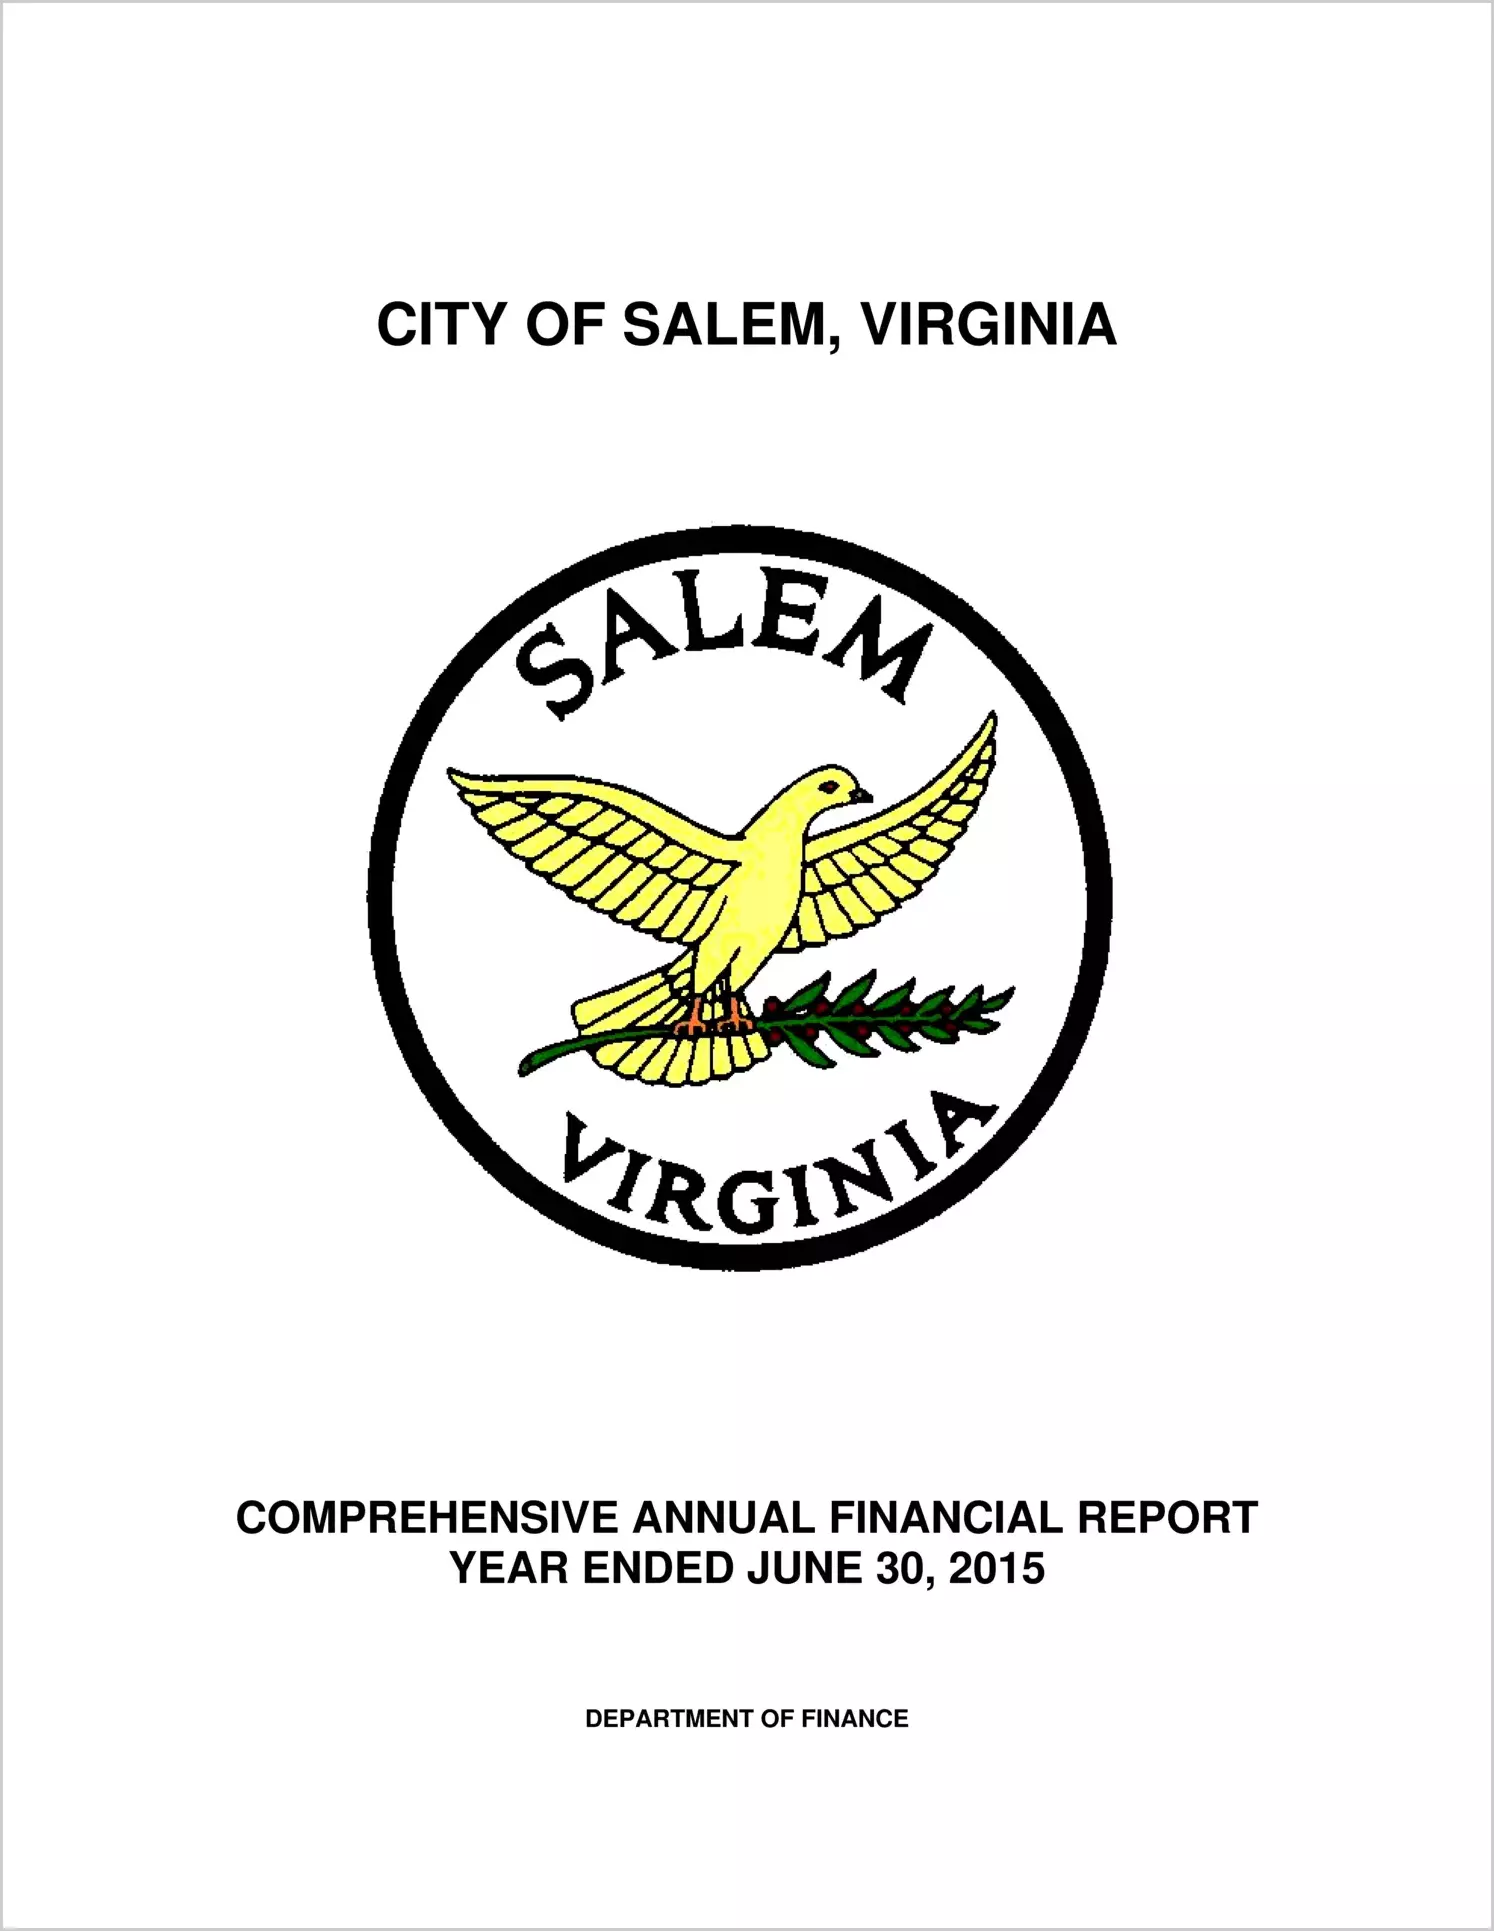 2015 Annual Financial Report for City of Salem